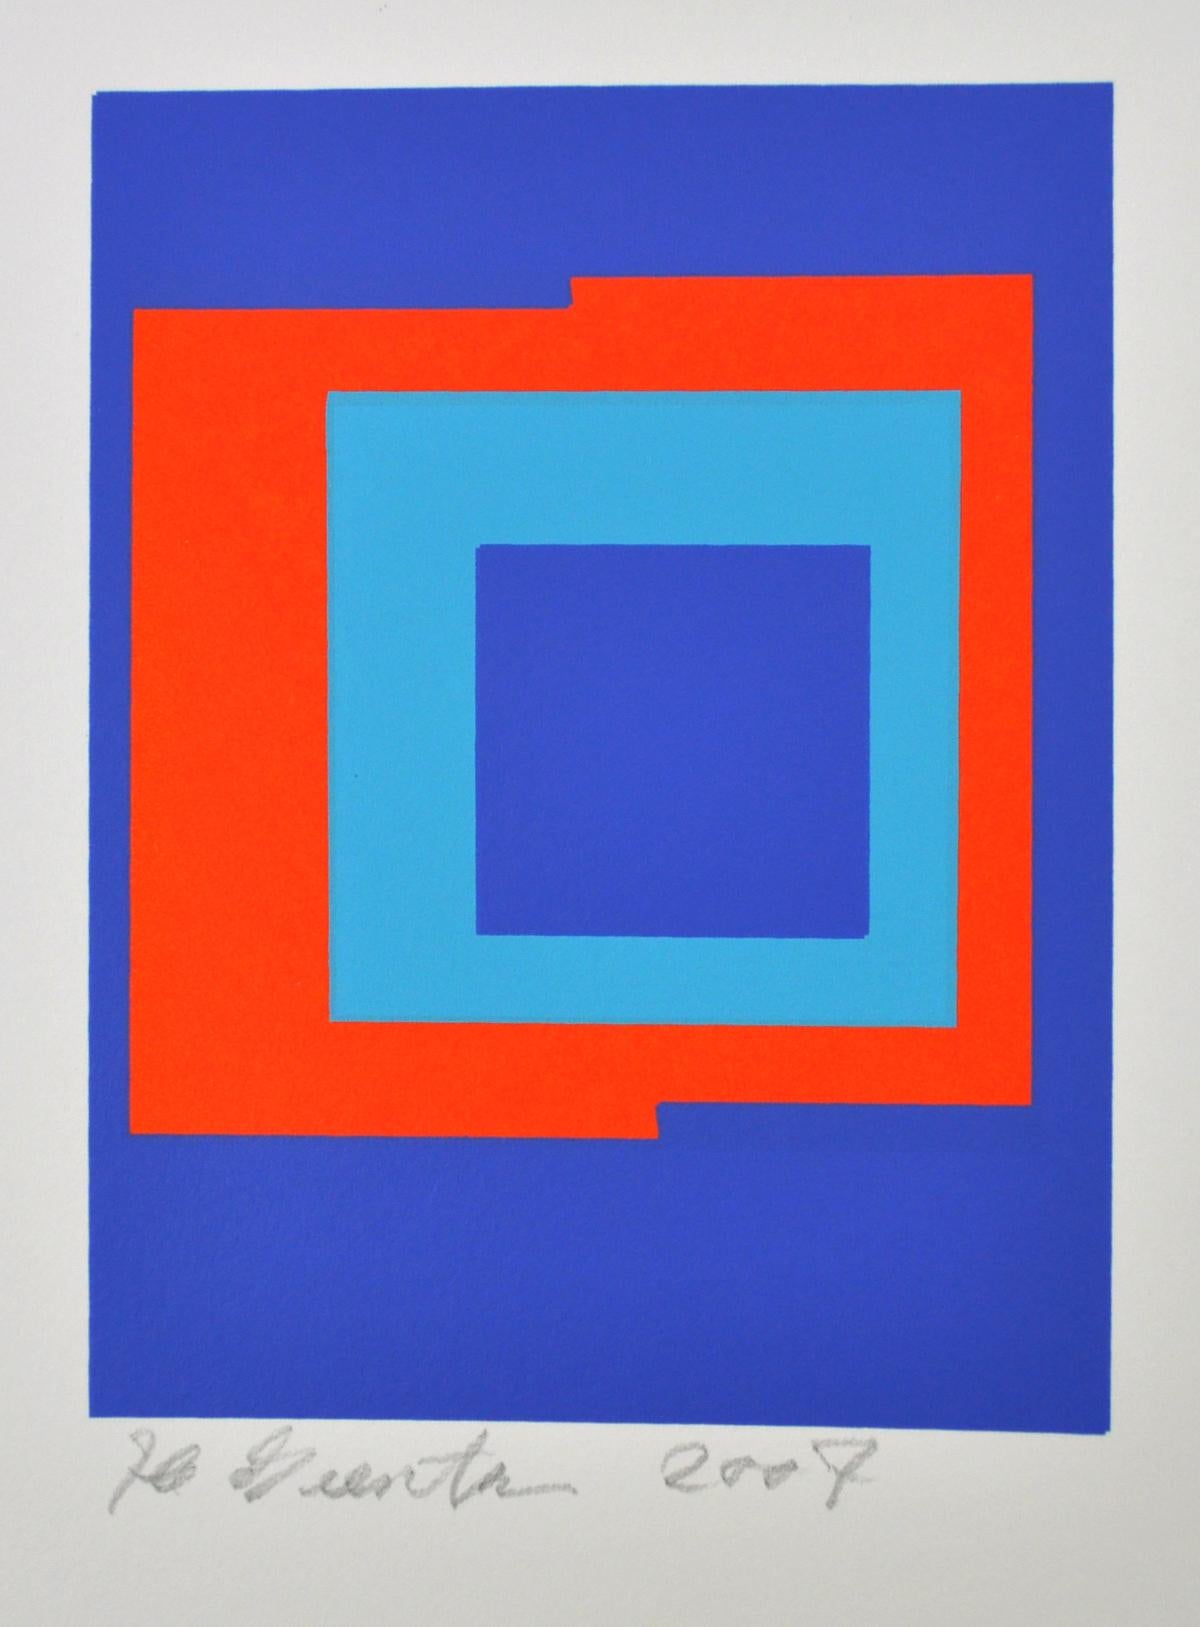 Screen Prints (3) by Ib Geertsen, signed, 2007.
Ib Geertsen (1919-2009) worked with the concrete art, where the line, shape, color and movement are the content.

Occupation: sculptor, painter, graphic artist, color architect

Geertsens works are art